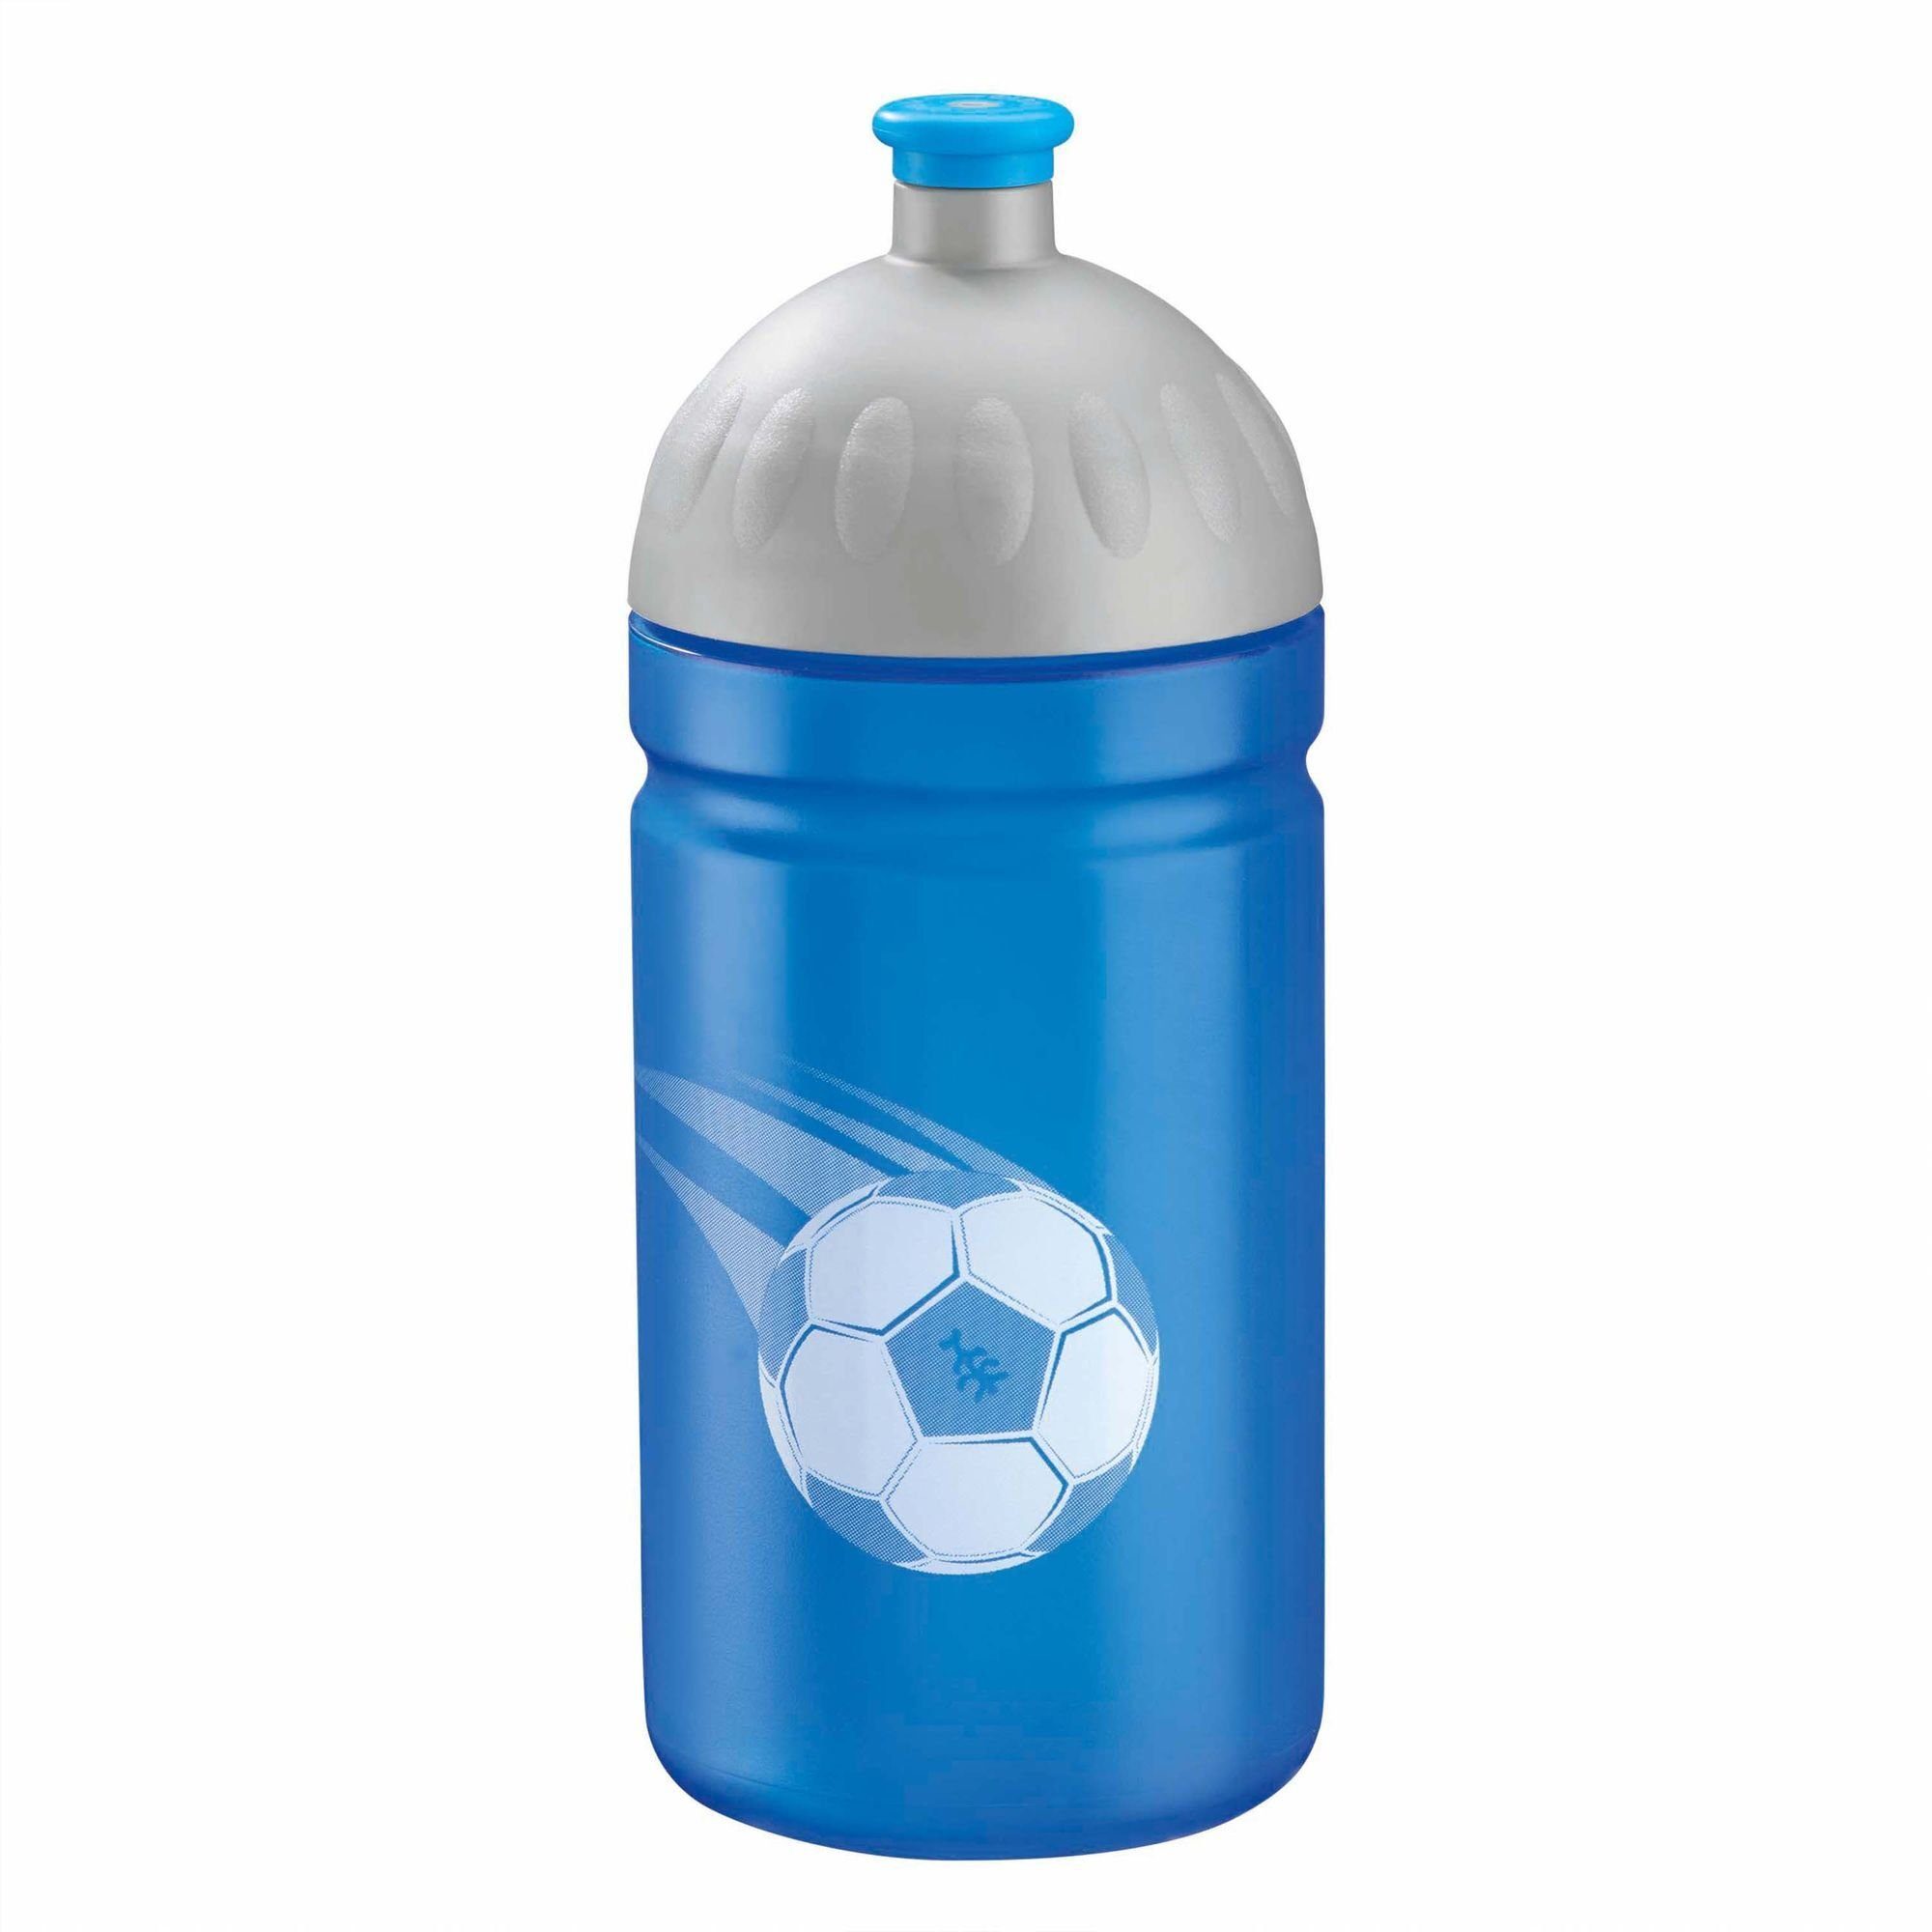 Step by soccer Step Trinkflasche lars